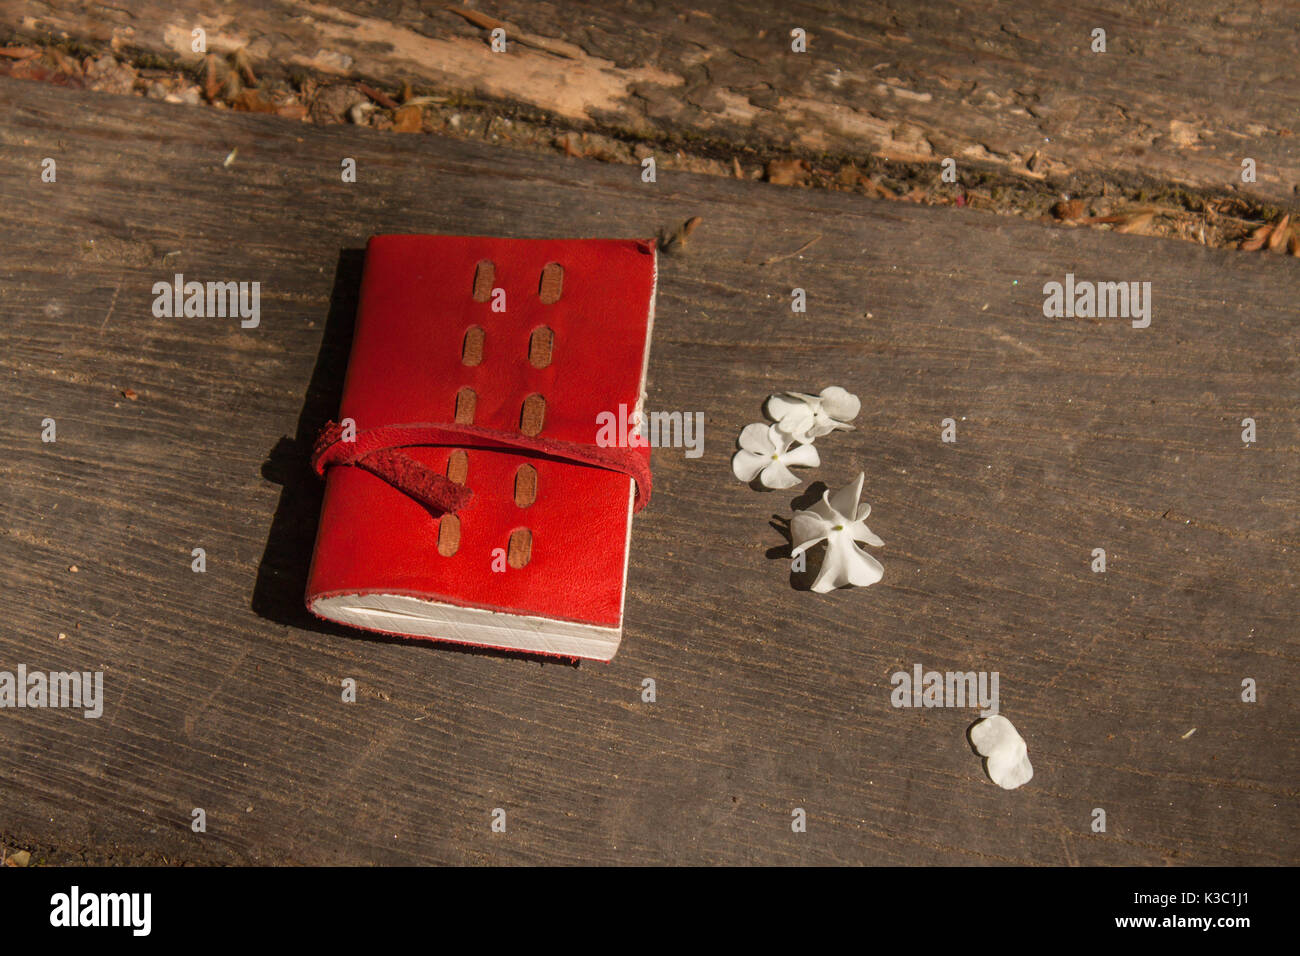 Red diary book and small white flowers on wood Stock Photo